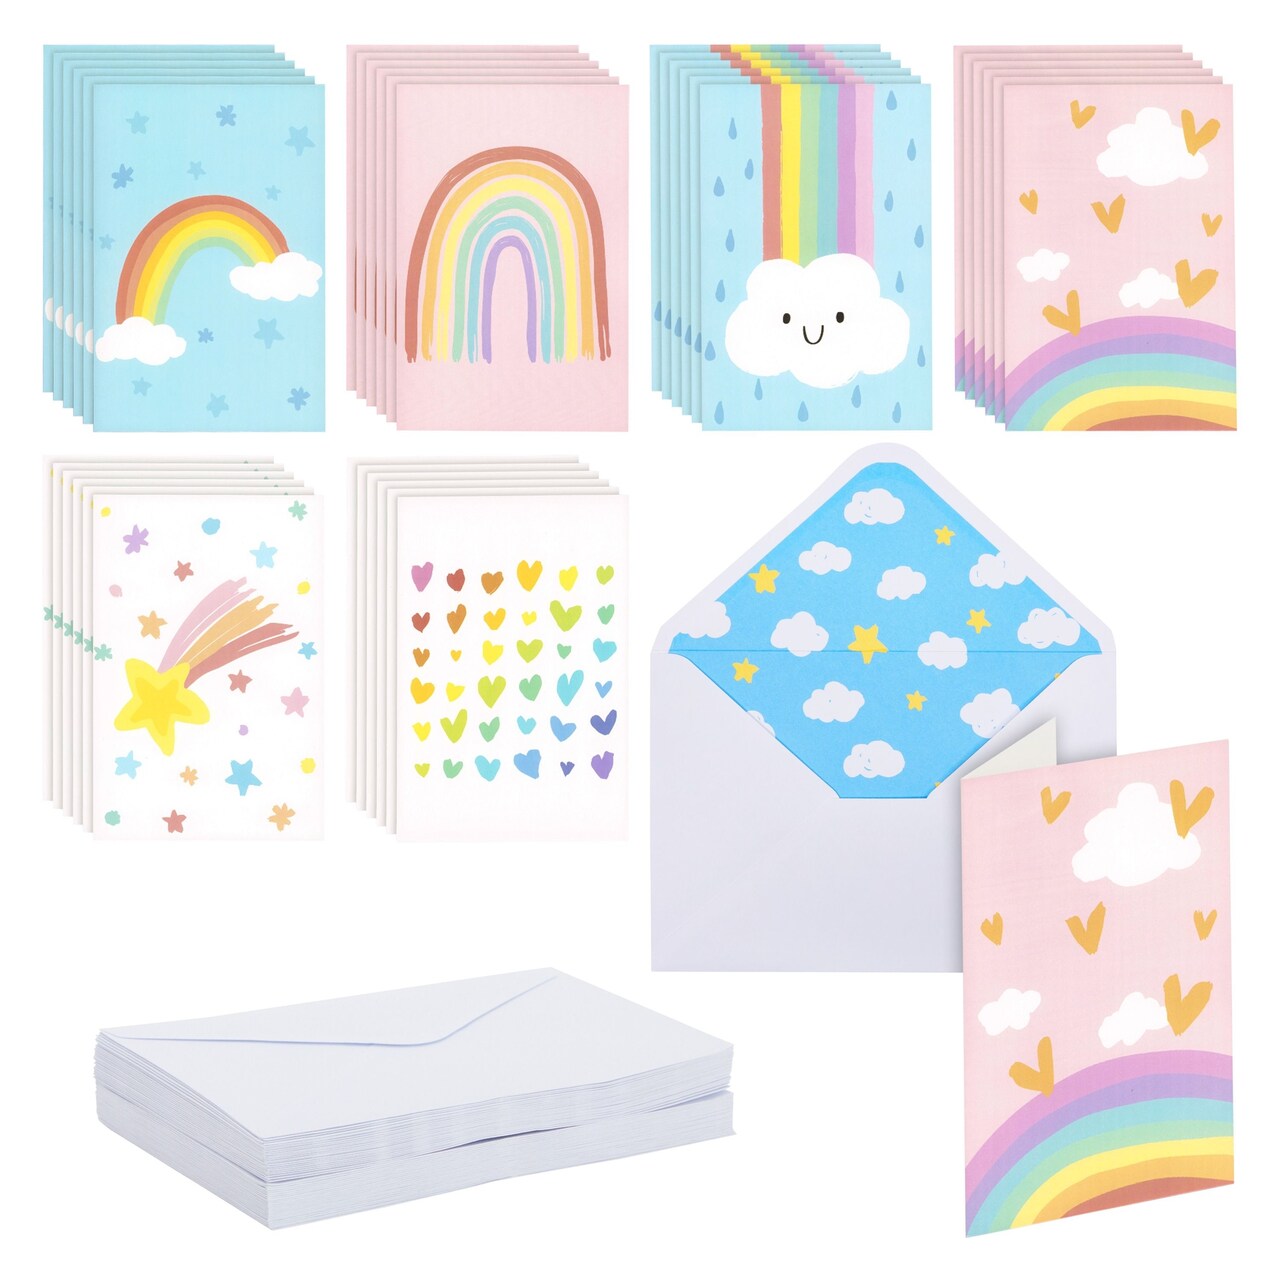 48 Pack Pastel Rainbow Thank You Cards, 4x6 Blank Cards and Envelopes for Baby Showers, Birthdays, All Occasion (6 Designs)